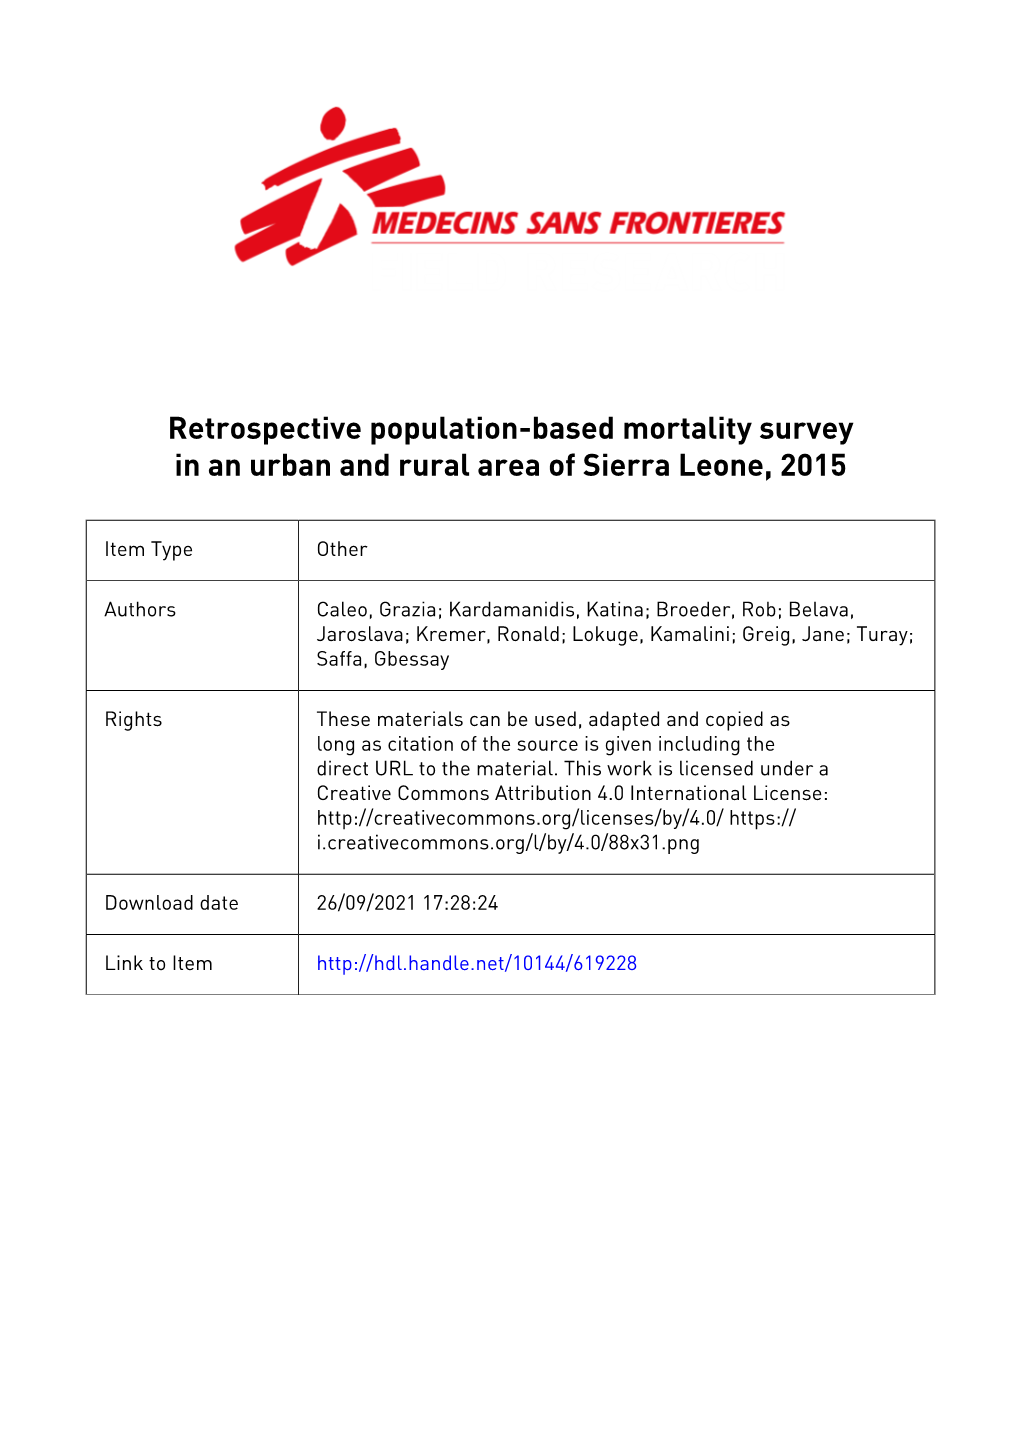 Retrospective Population-Based Mortality Survey in an Urban and Rural Area of Sierra Leone, 2015